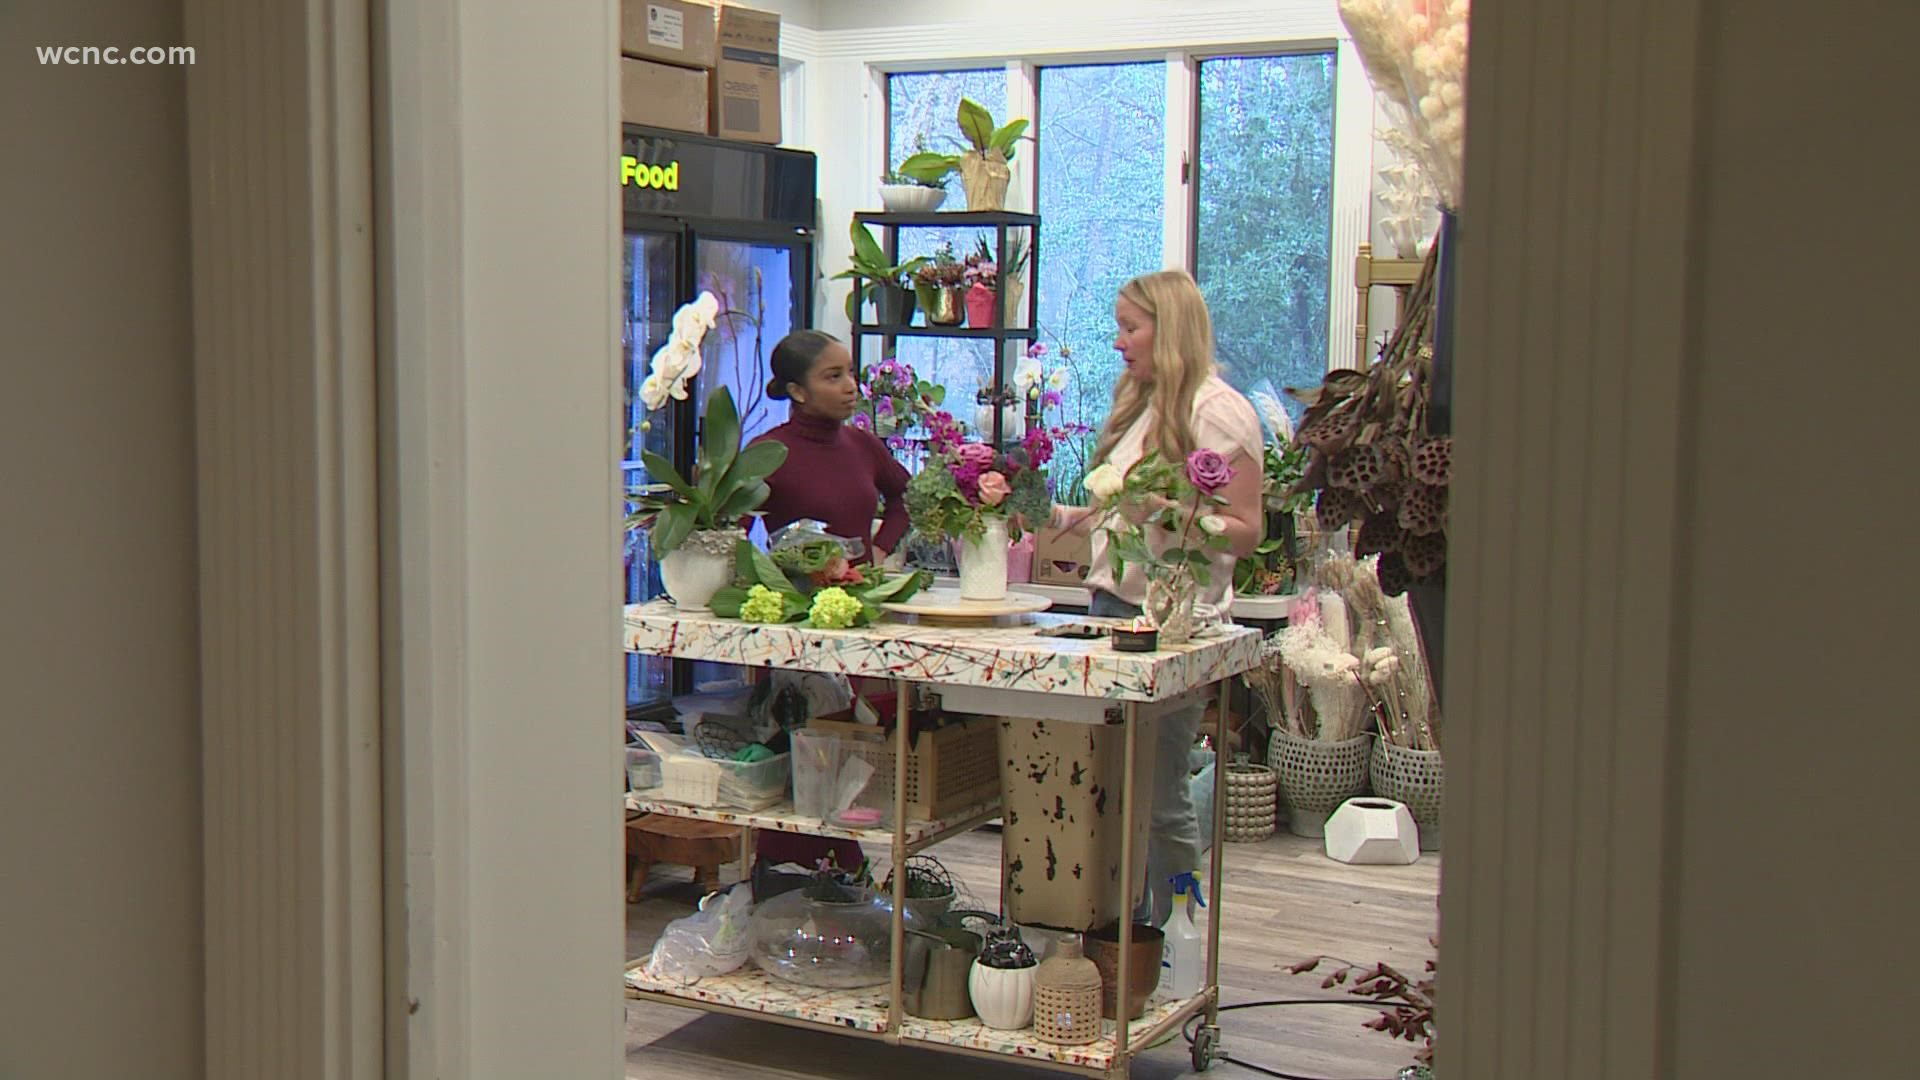 Although Valentine's Day is one week away, a Charlotte businesswoman is gearing up to put together flowers and gifts to deliver to hundreds of women.